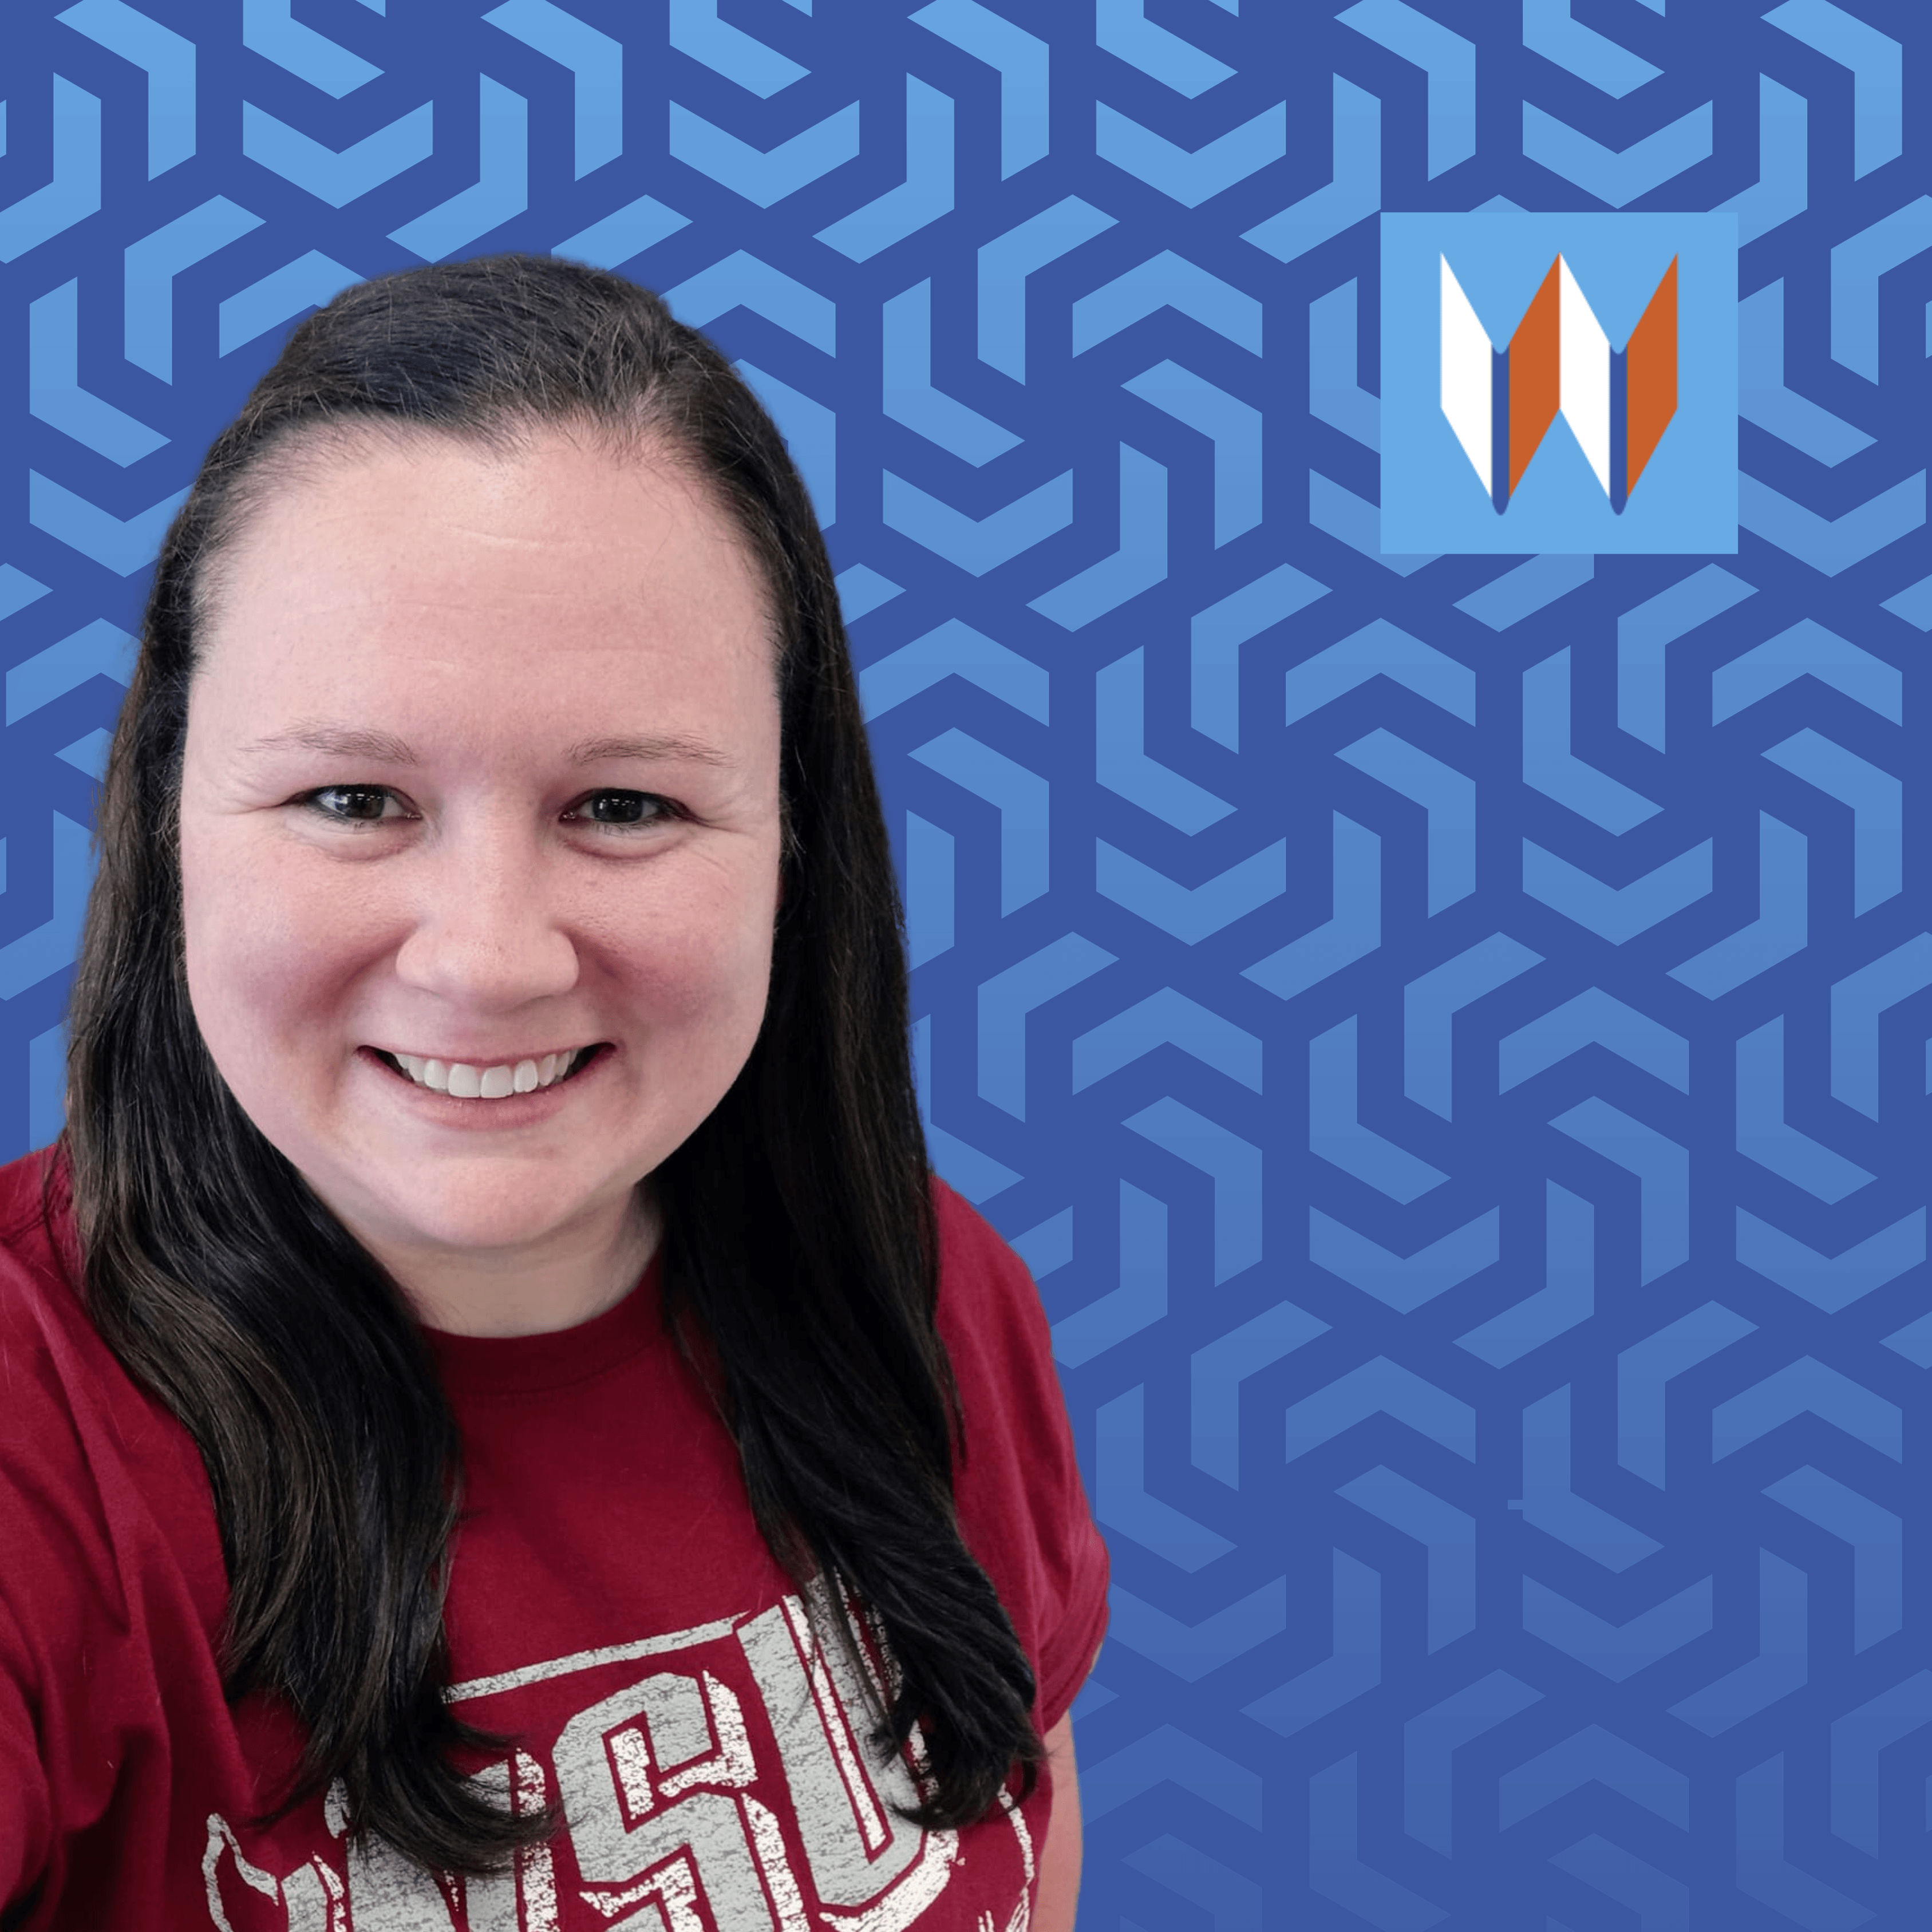 Uniontown branch manager, Katie, poses in front of a blue gradient spiral background.